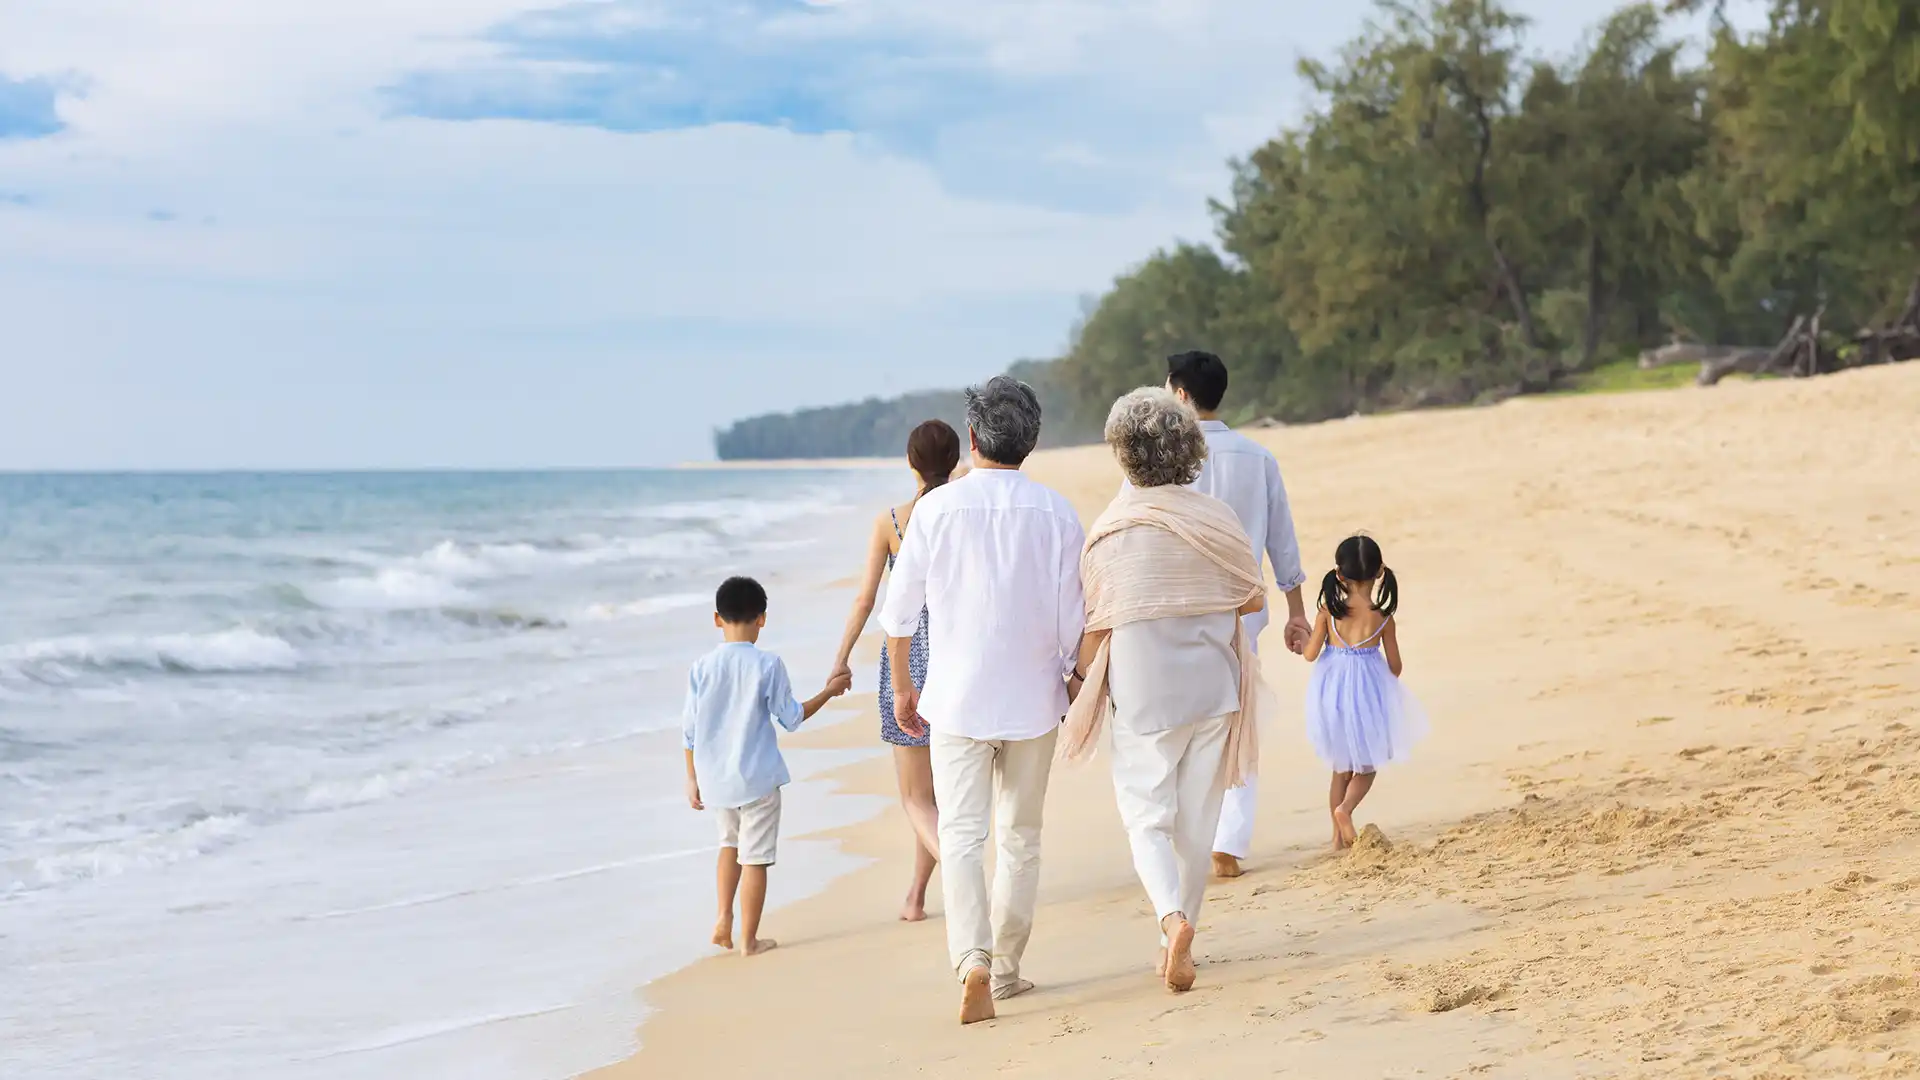 View of adults and children in light-colored clothing walking the beach toward green trees.